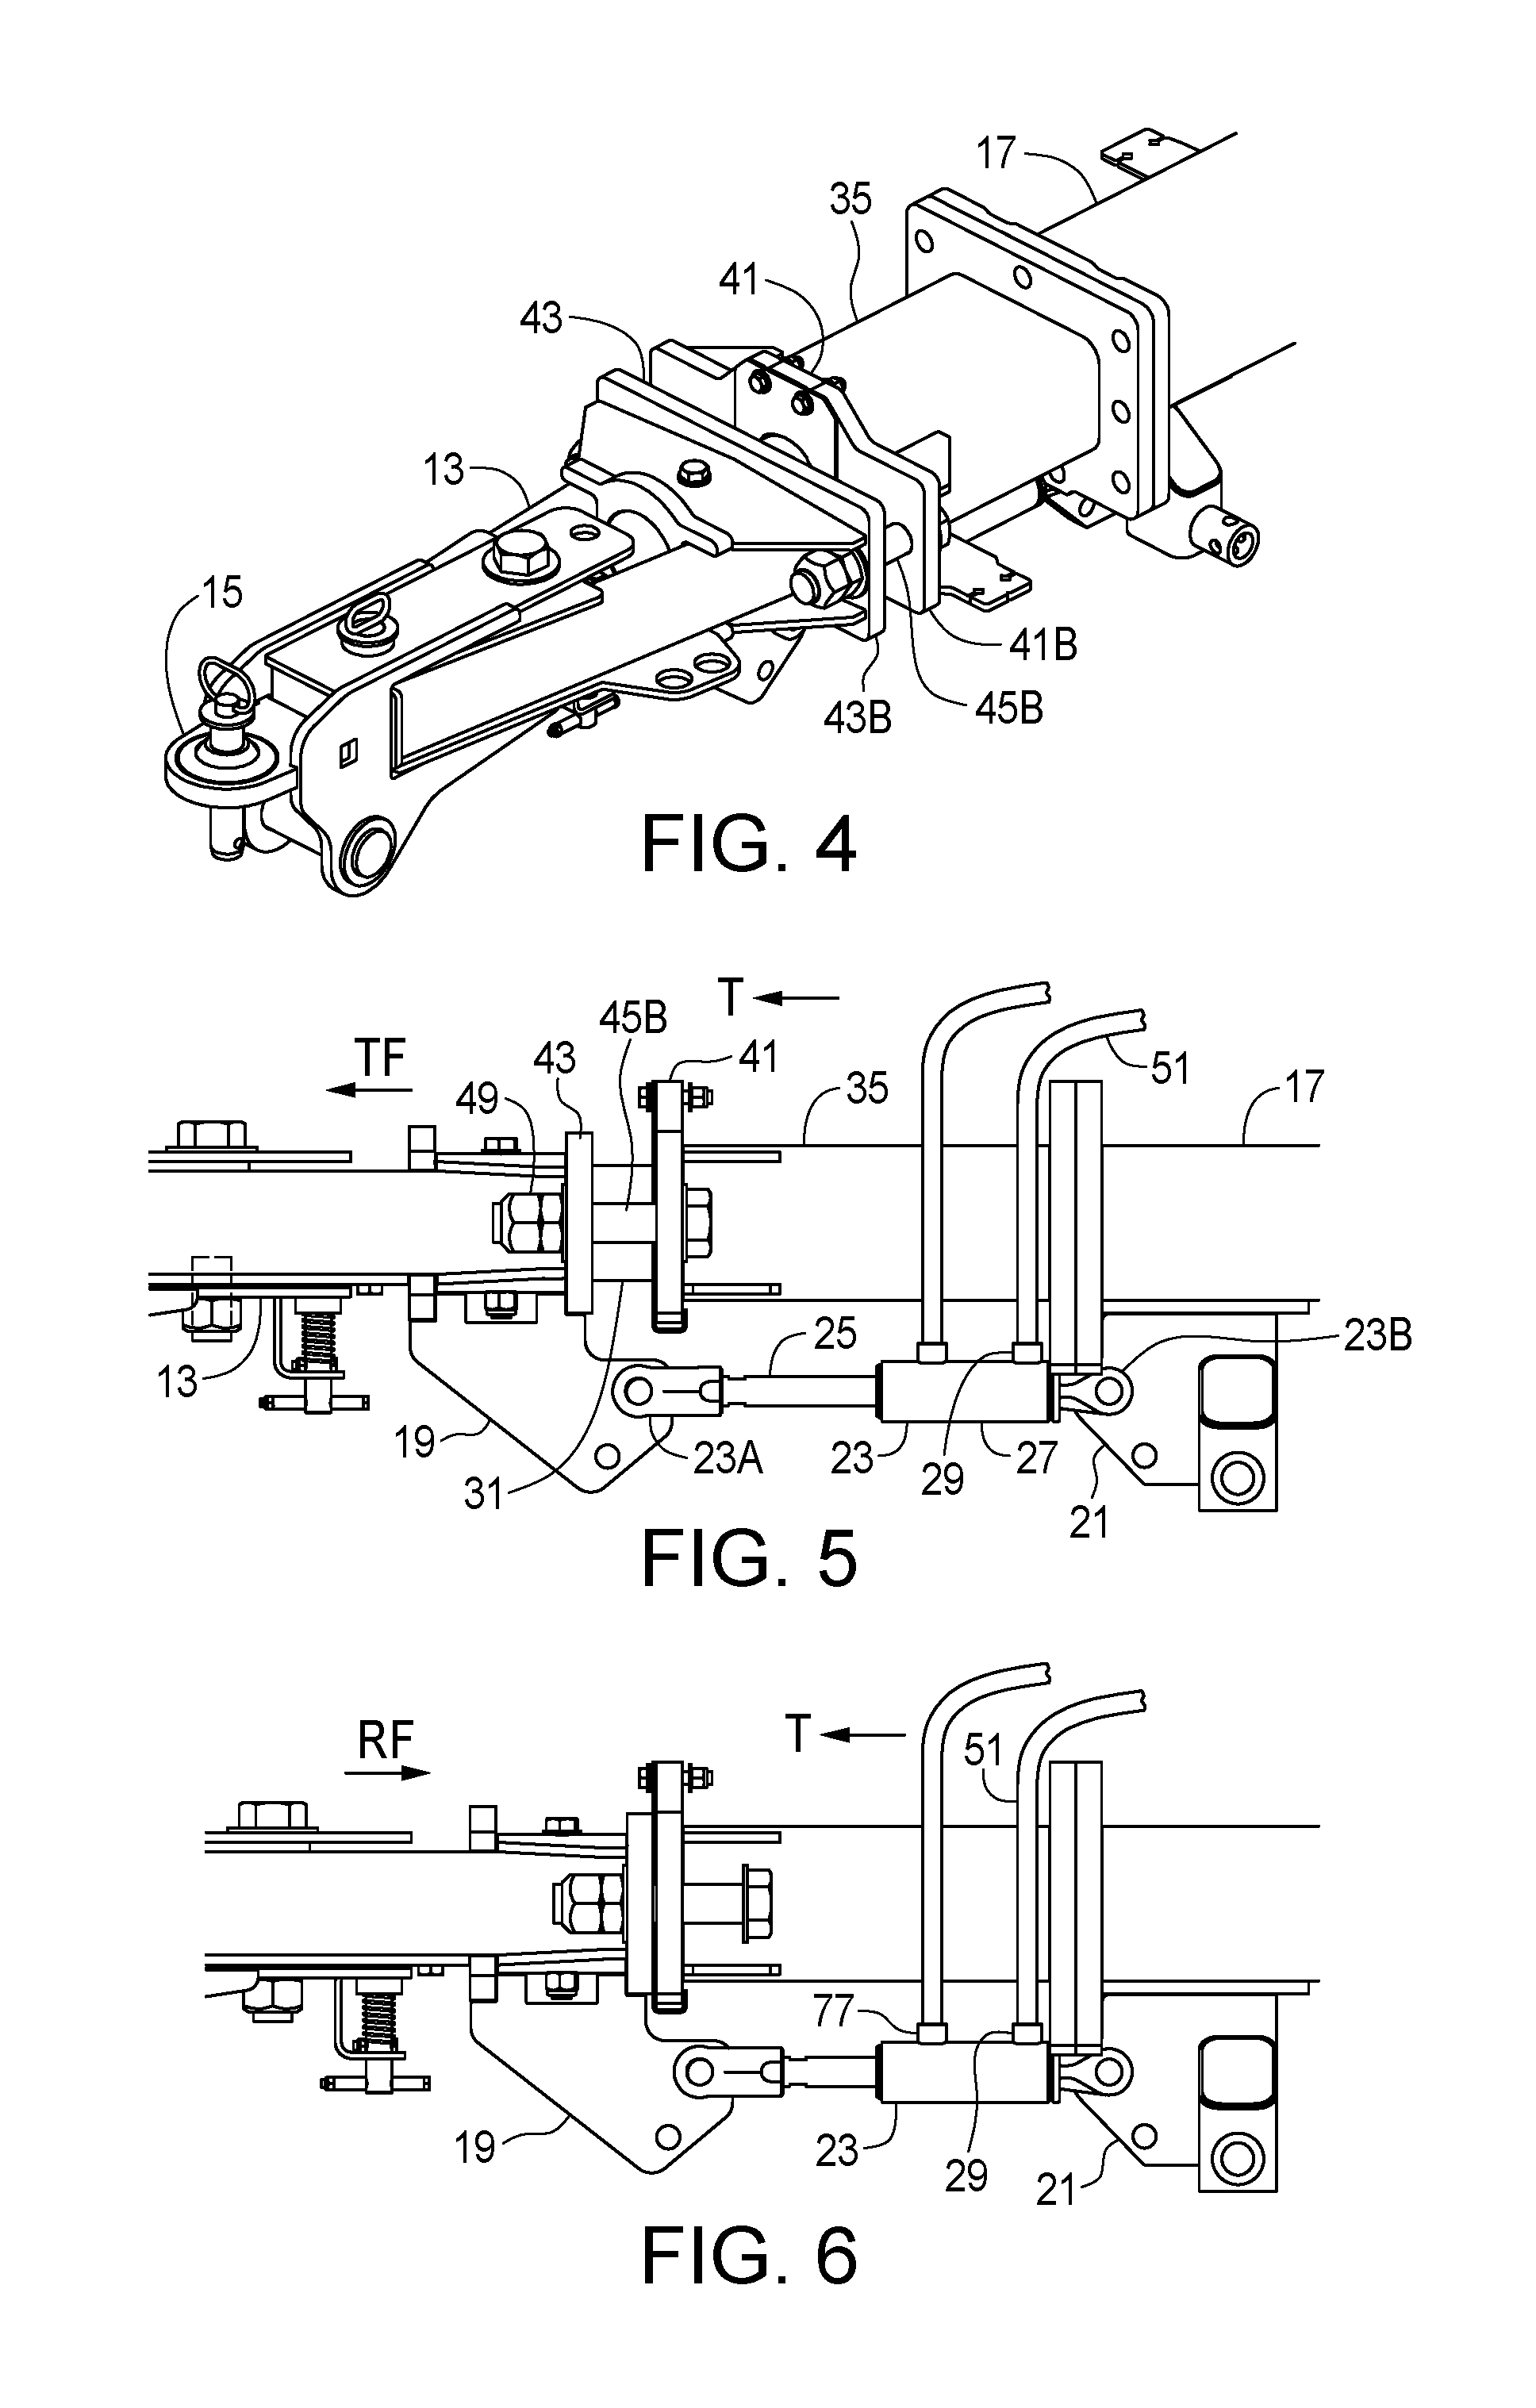 Braking system for towed vehicles